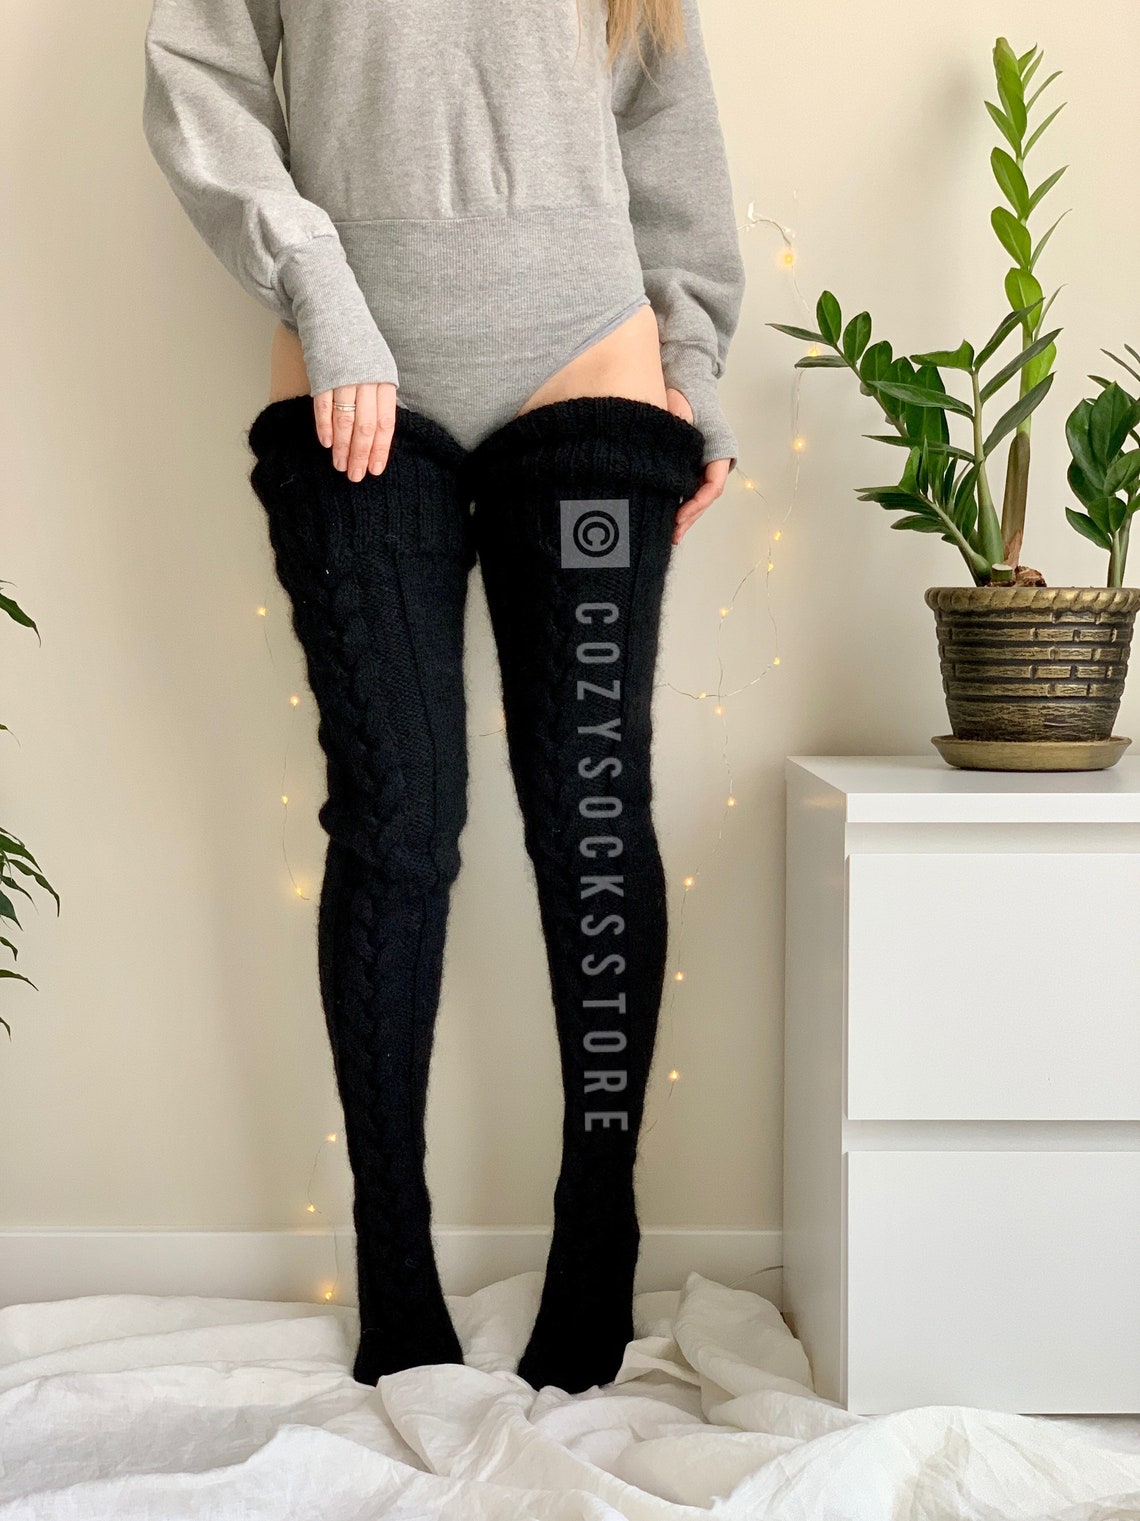 Sexy Black Stockings Thigh High Knitted Socks Plus Size Etsy